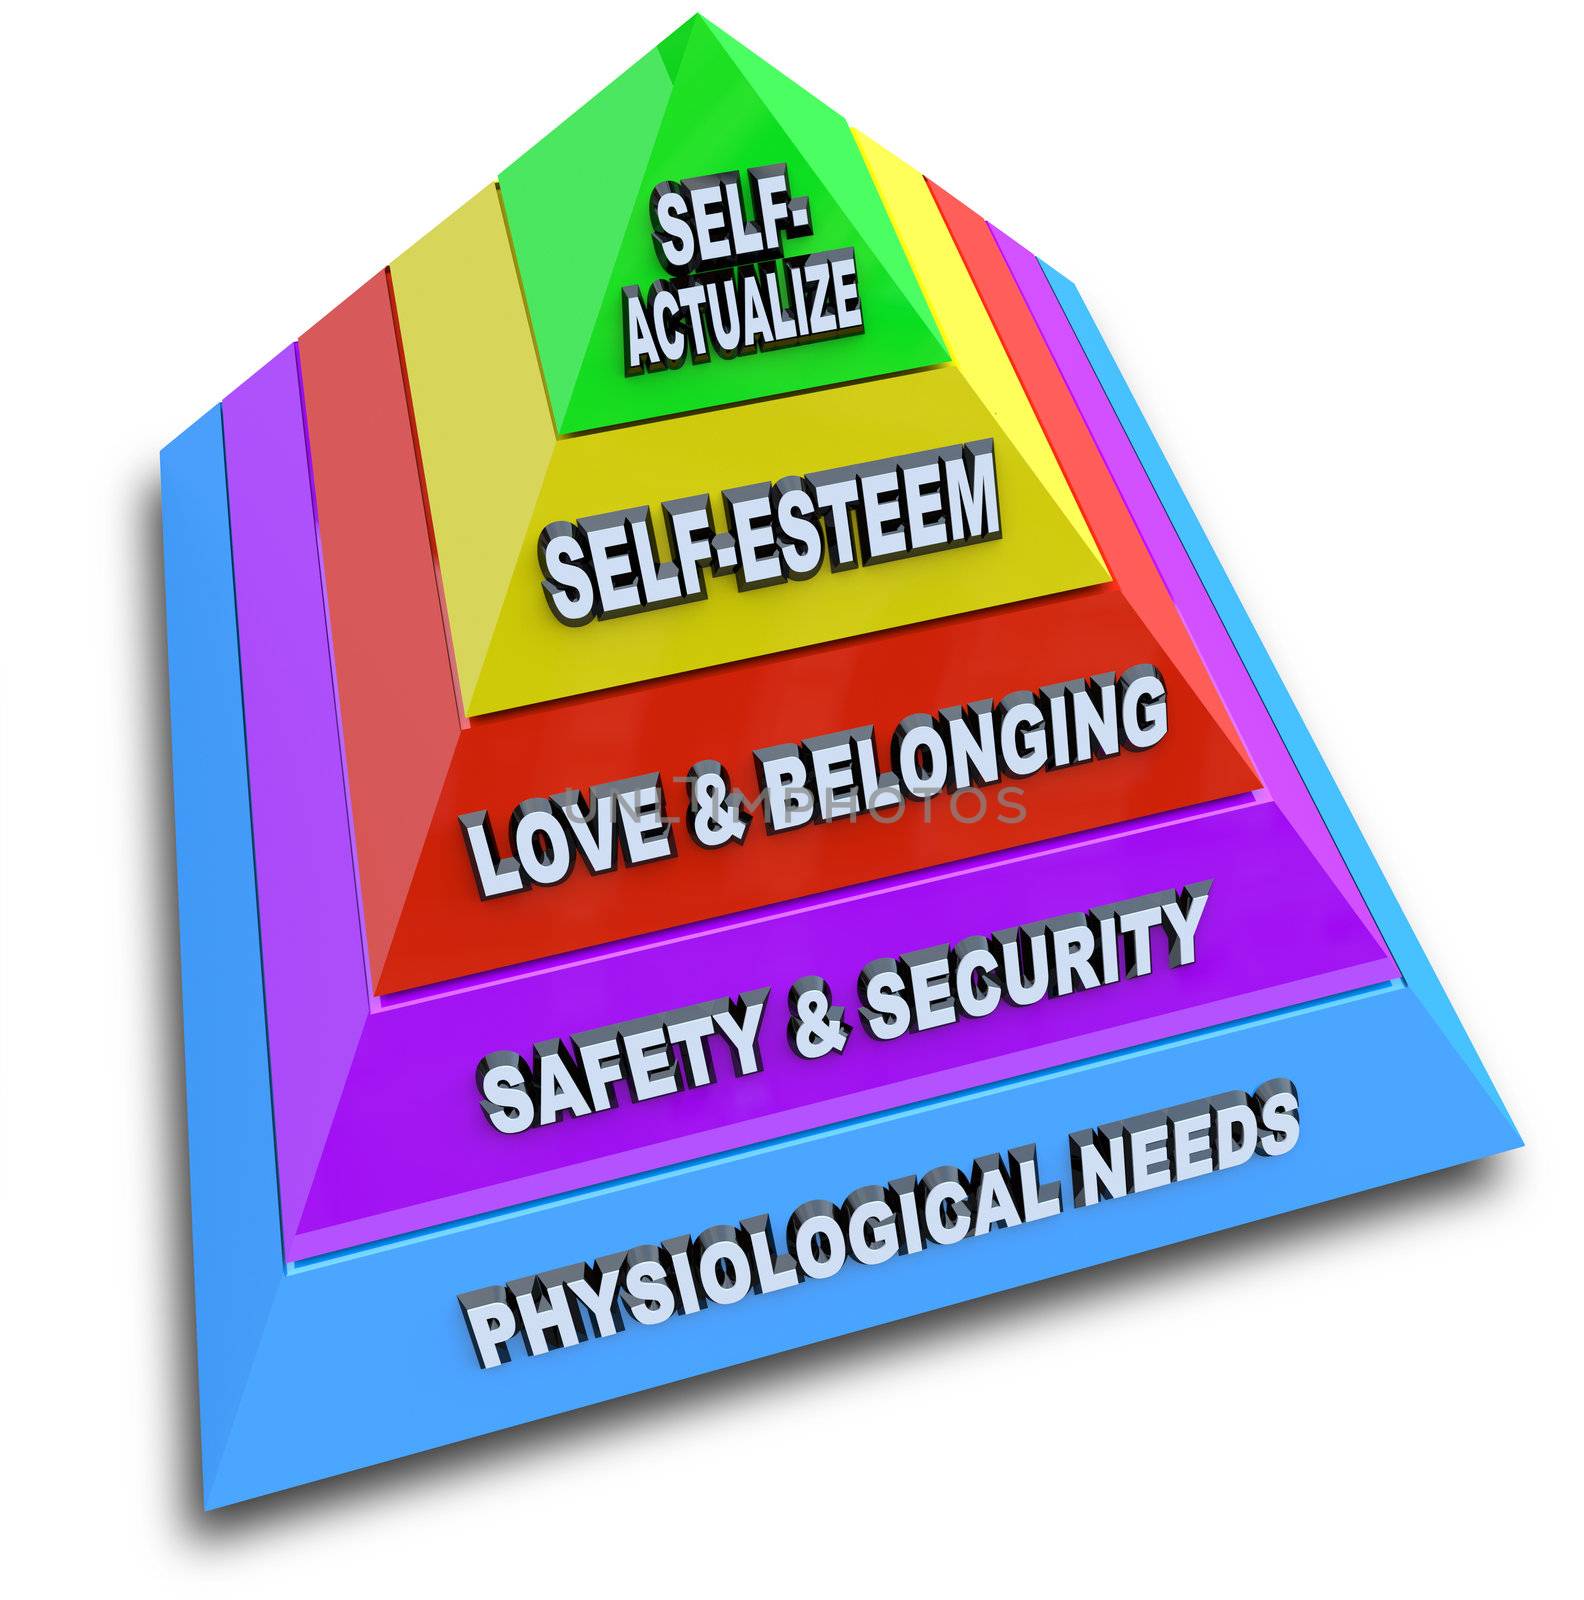 A pyramid depicting Maslow's Hierarchy of Needs, with levels for physiological needs, safety and security, love and belonging, self-esteem, and self-actualization